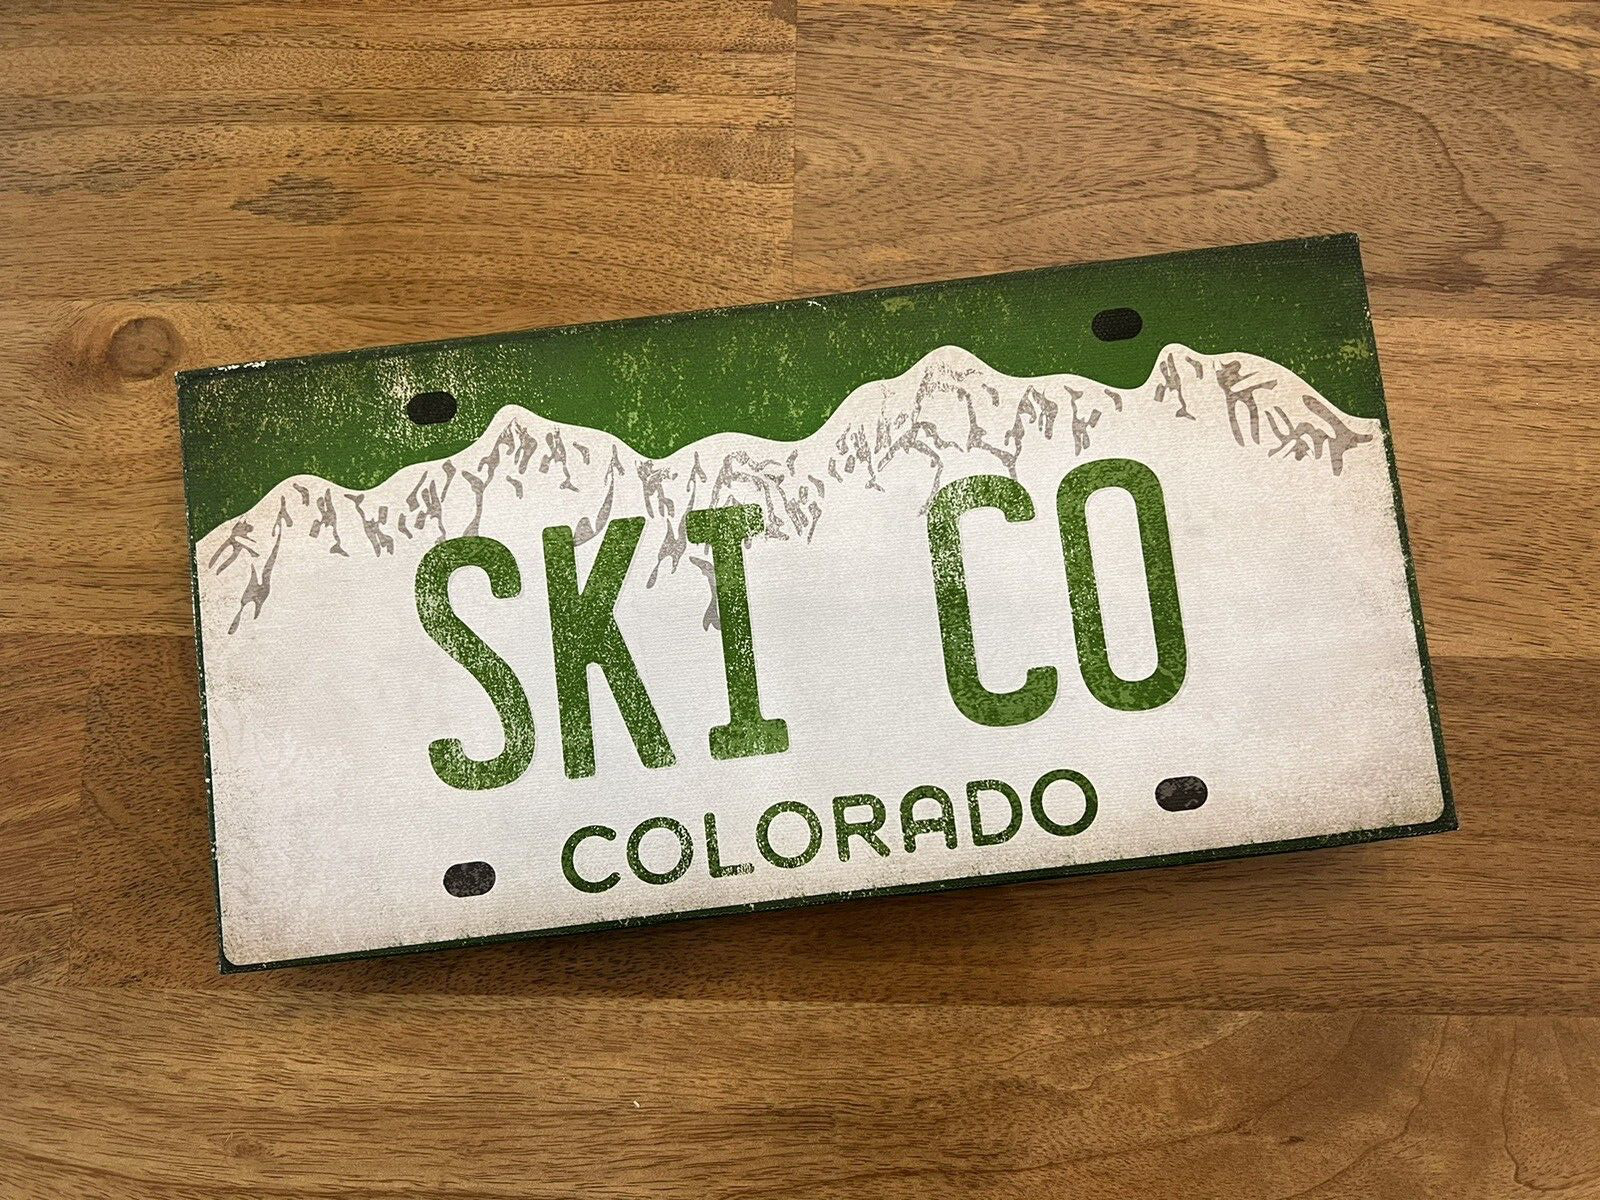 Ski CO Colorado License Plate Cabin Canvas Wall Art Signed by Artist Ryan Fowler